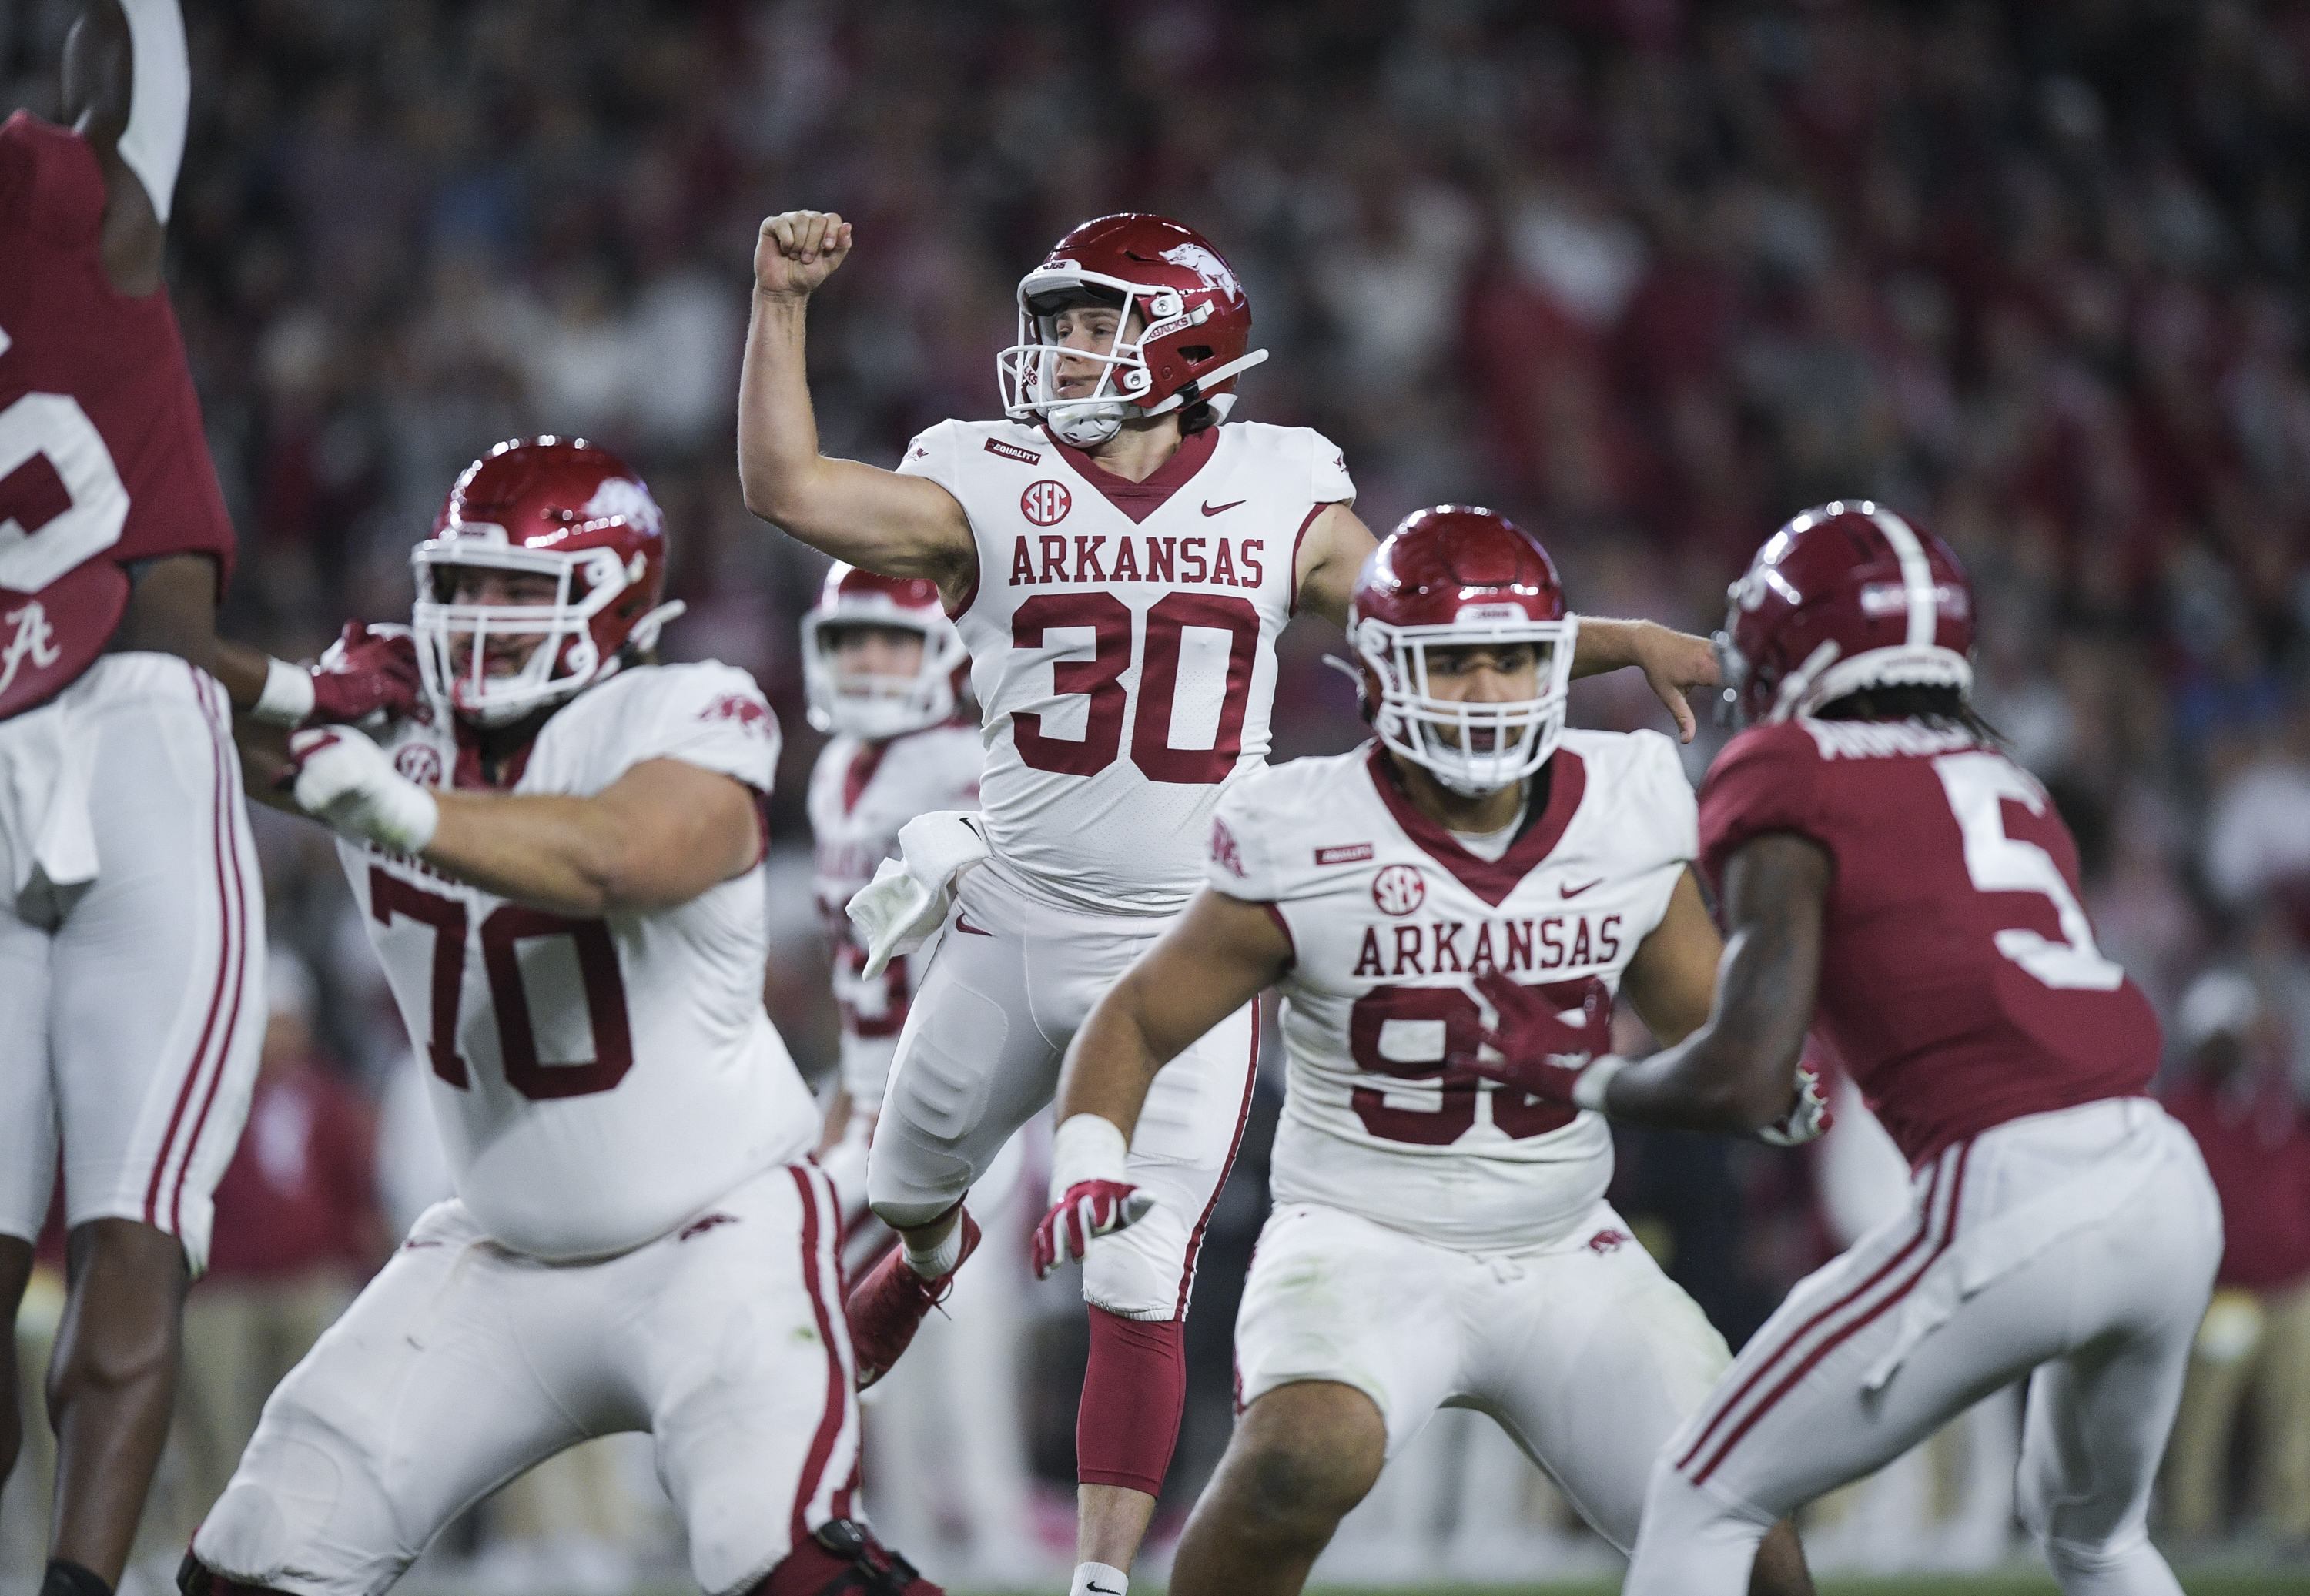 Do-it-all man: Hogs' Bauer punts, holds, passes and runs, too - WholeHogSports